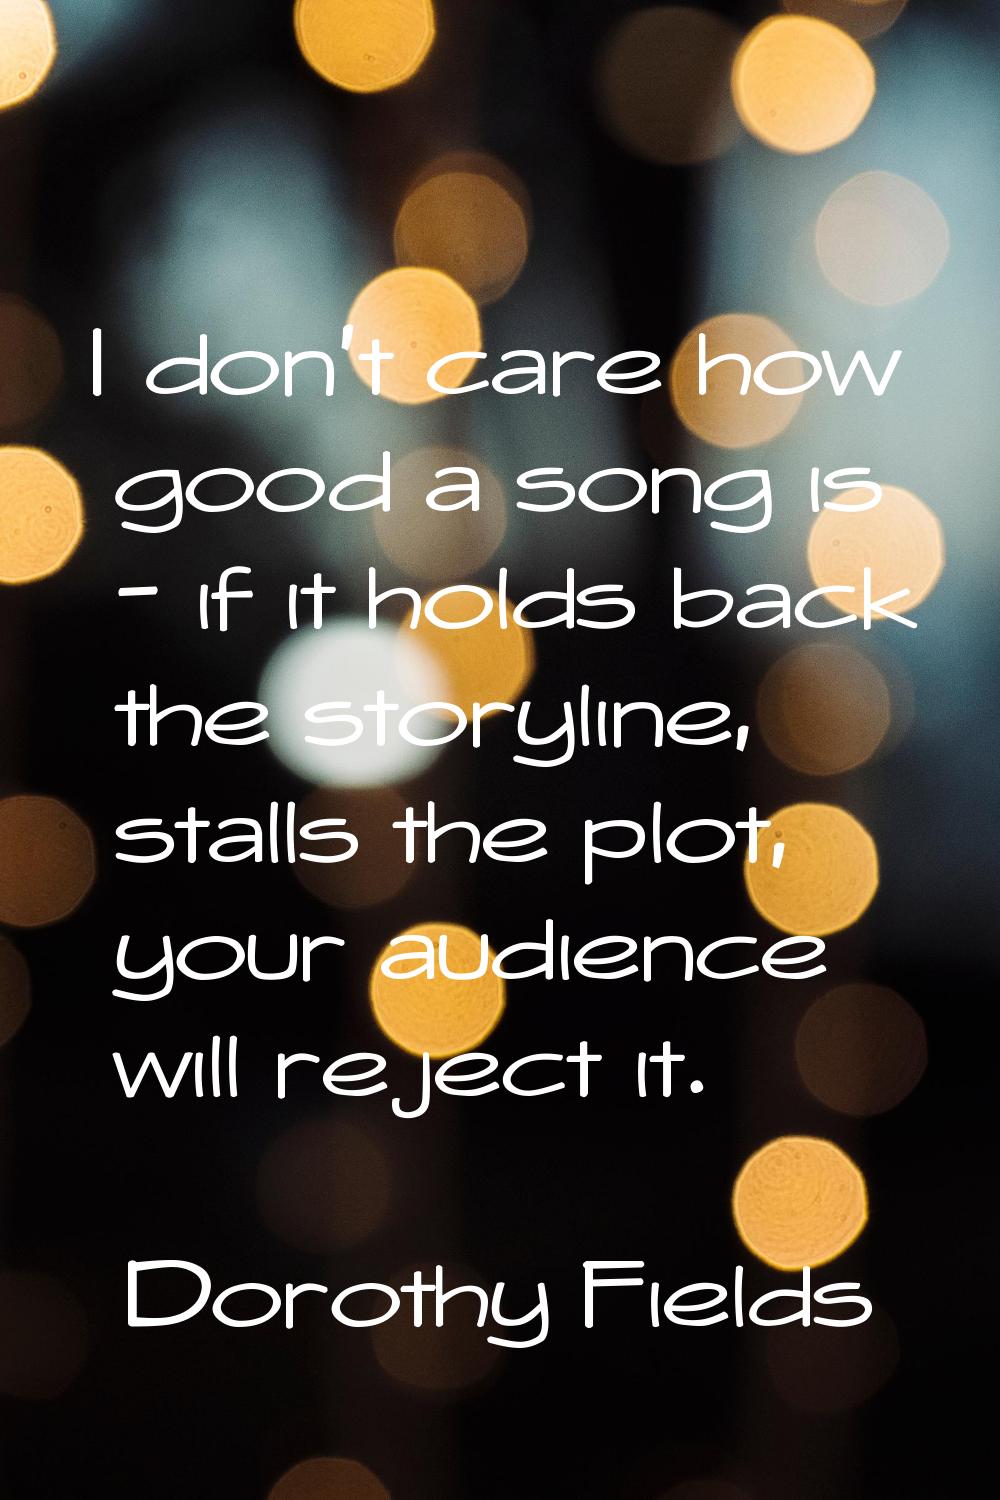 I don't care how good a song is - if it holds back the storyline, stalls the plot, your audience wi